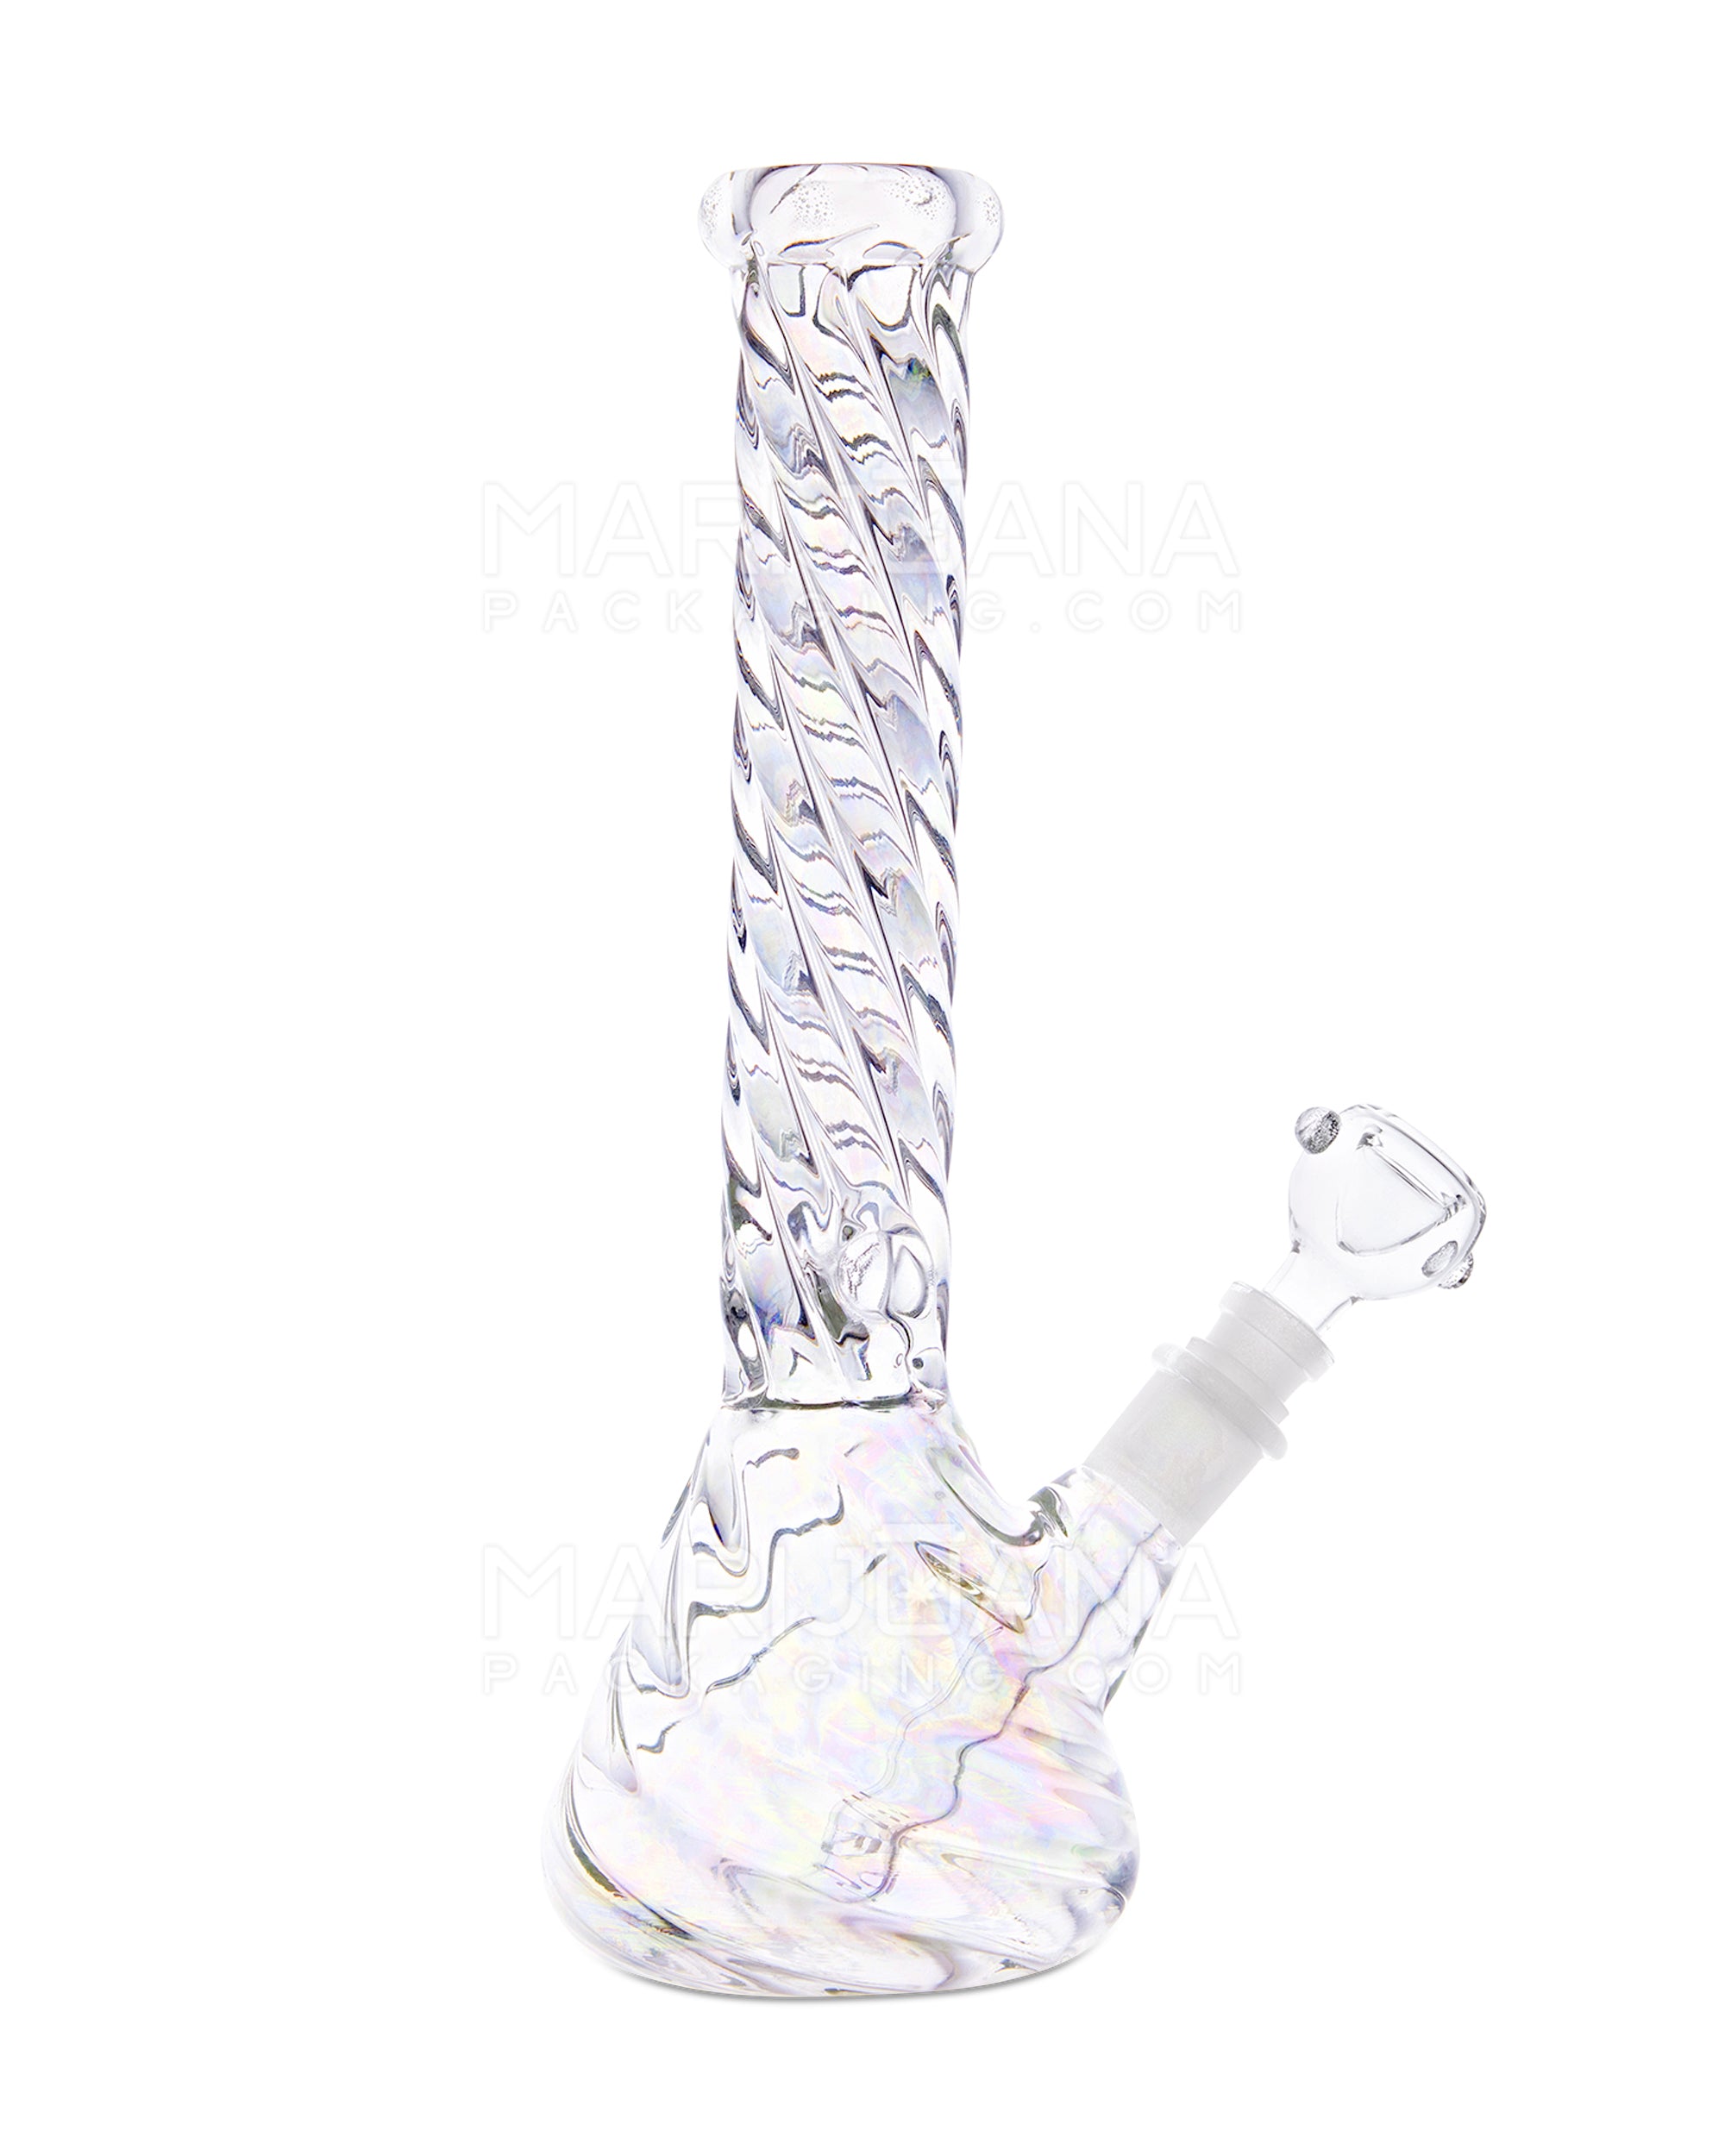 Straight Neck Iridescent Twisted Glass Beaker Water Pipe | 10.5in Tall - 14mm Bowl - Clear